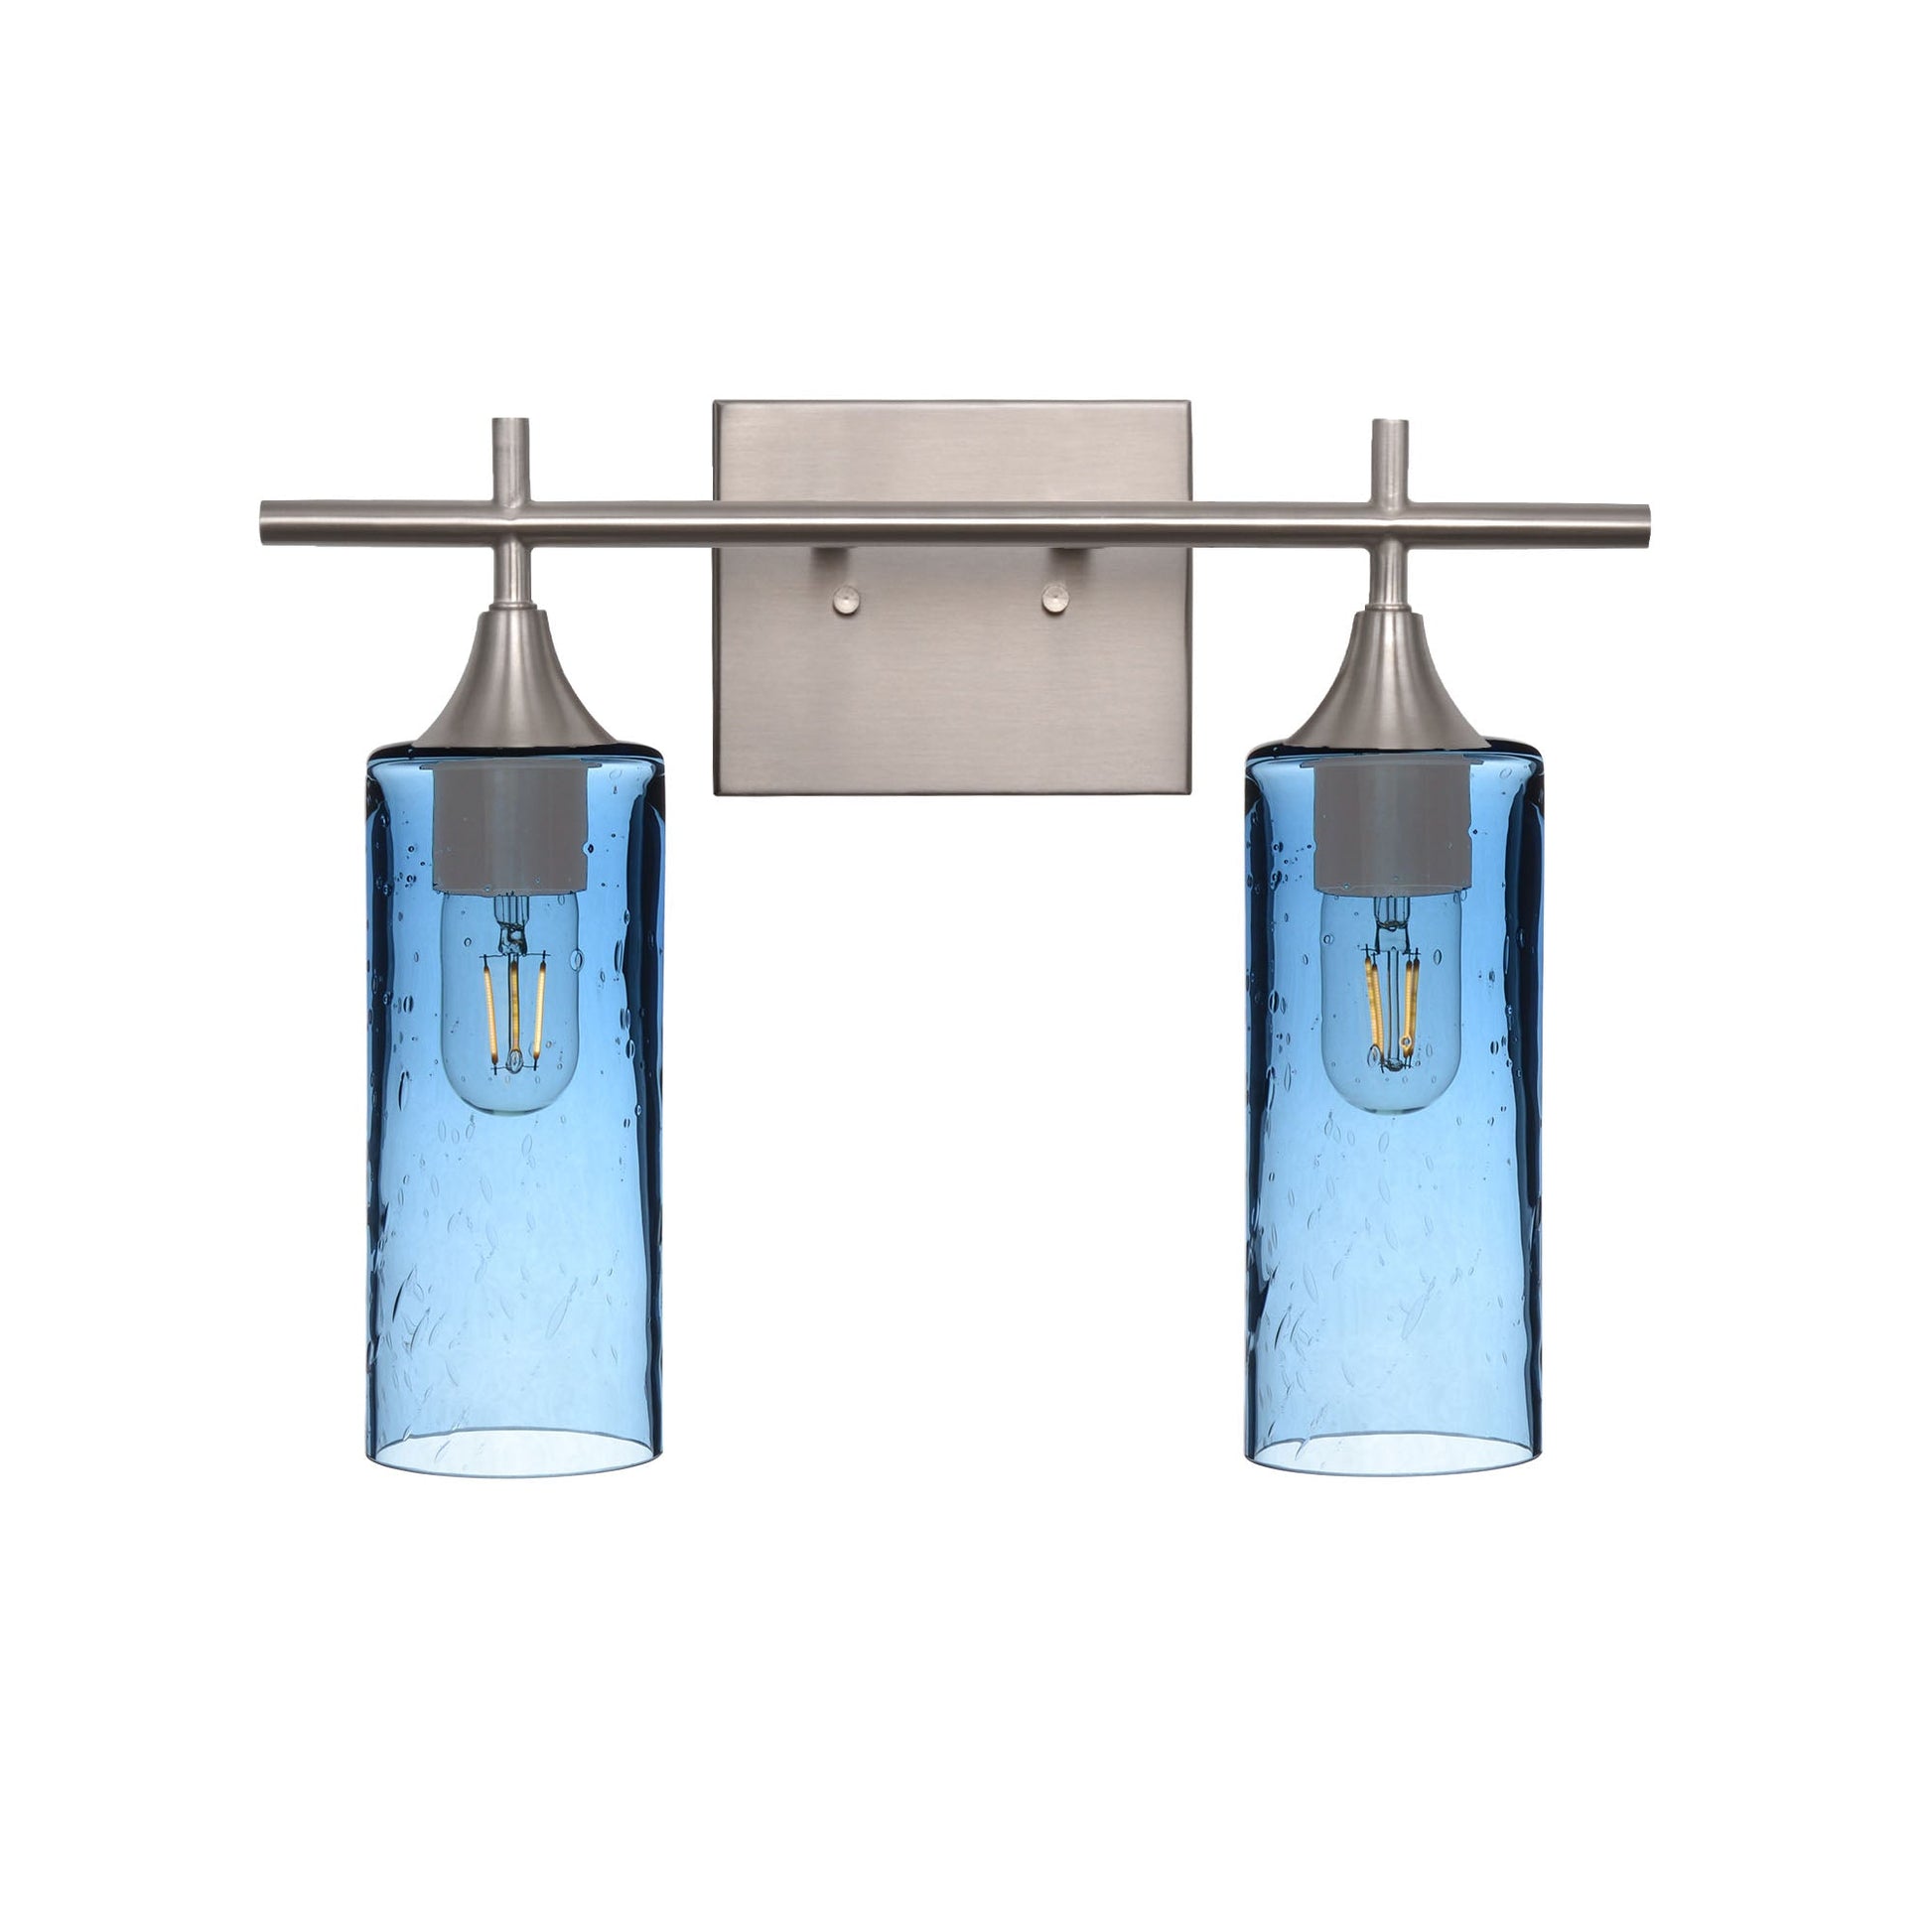 513 Lunar: 2 Light Wall Vanity-Glass-Bicycle Glass Co - Hotshop-Steel Blue-Brushed Nickel-Bicycle Glass Co